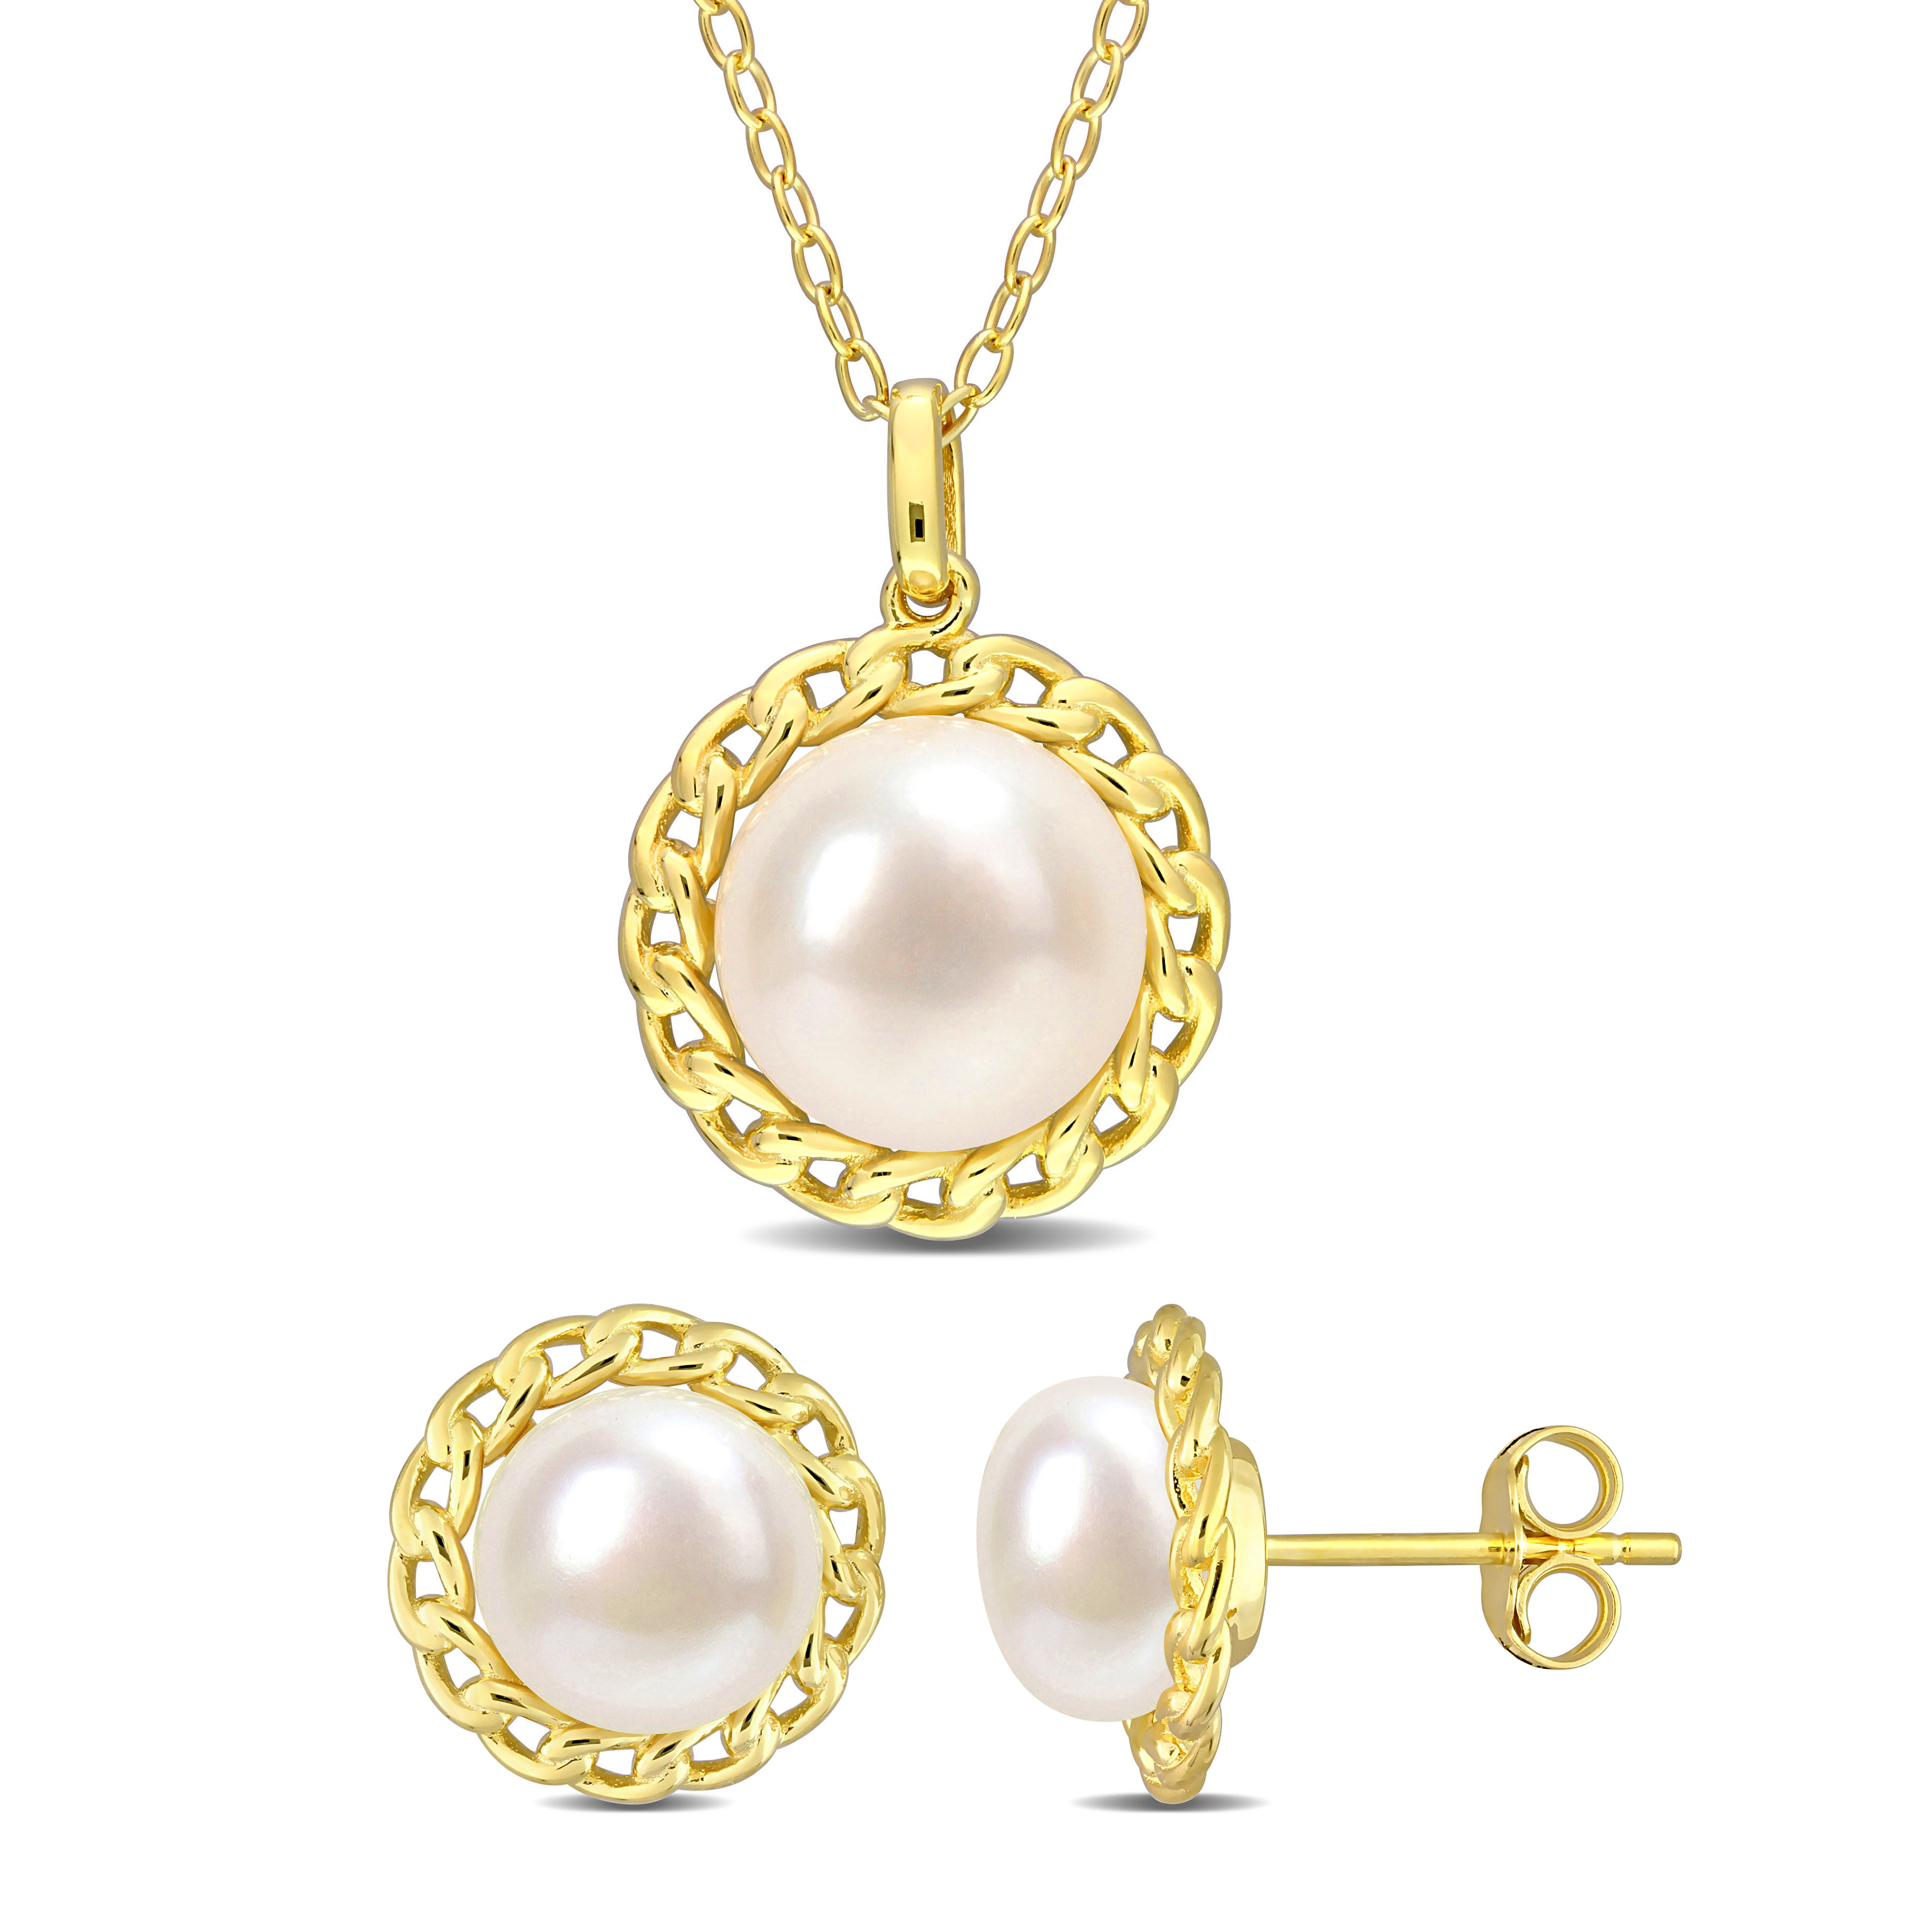 8 - 9.5 MM White Freshwater Cultured Pearl Fashion Earrings & Pendant Set With Chain in Yellow Plated Sterling Silver